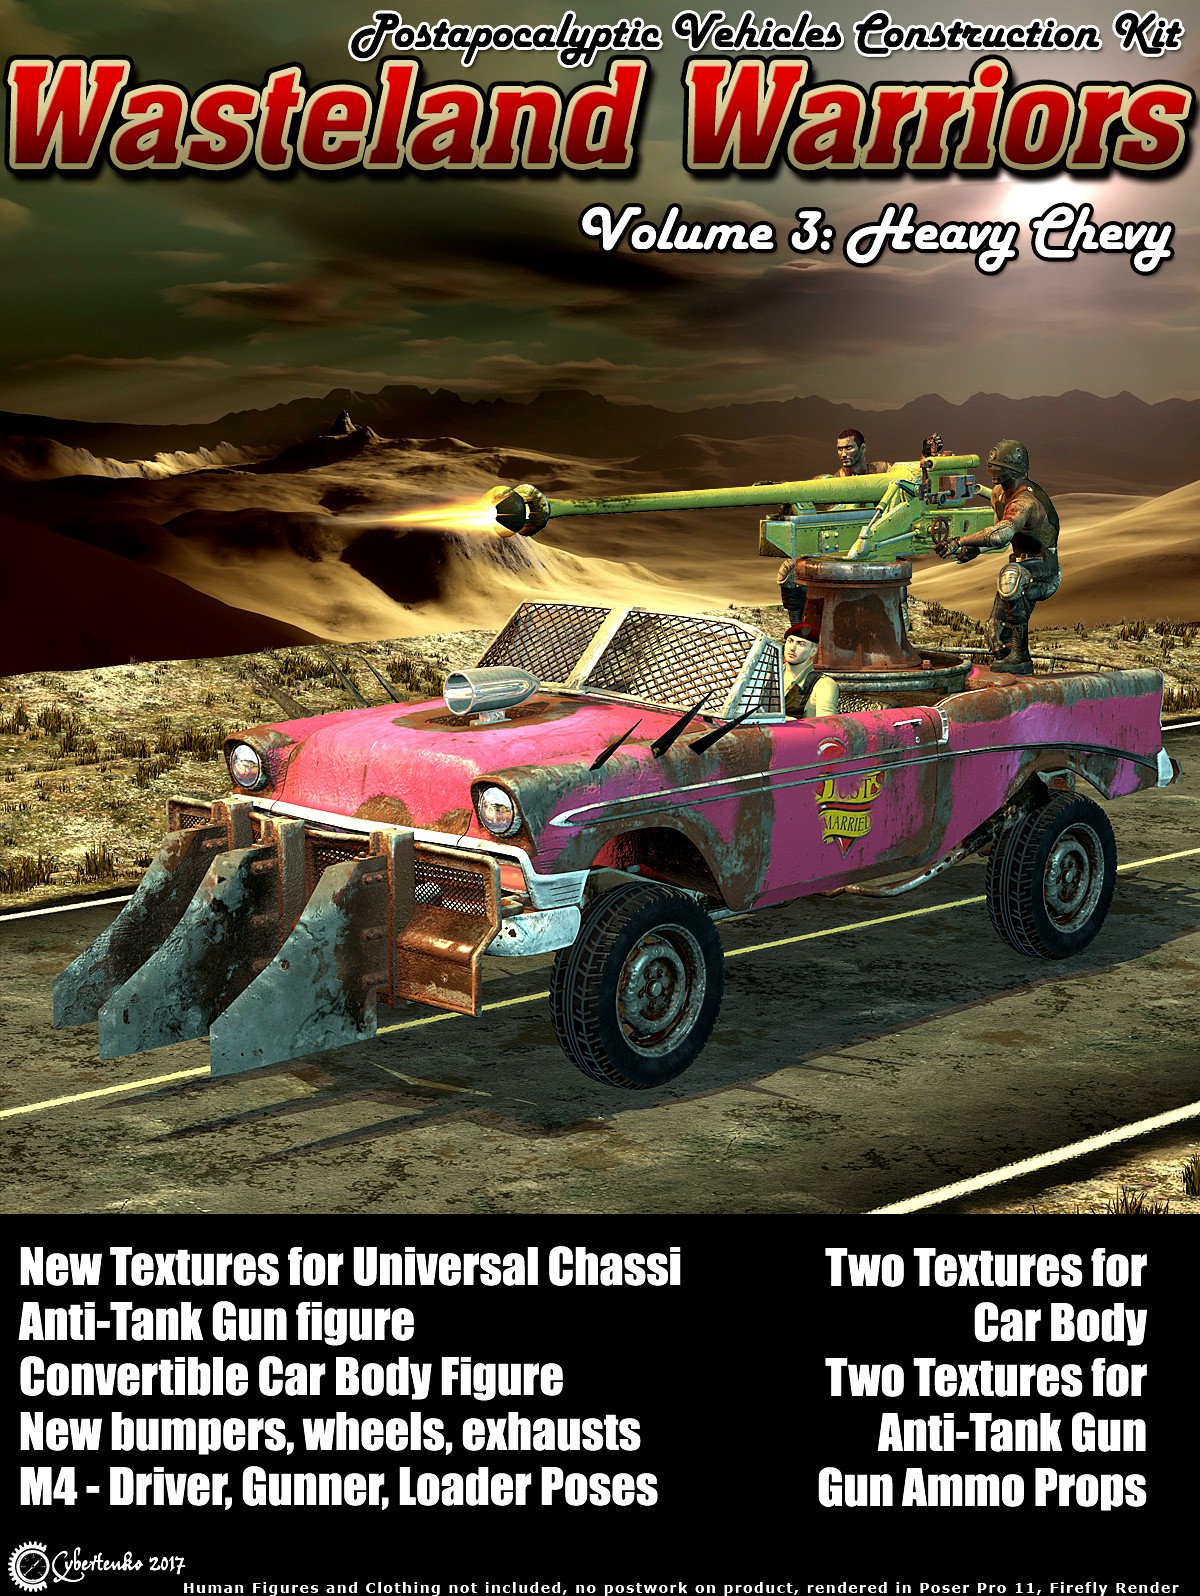 Wasteland Warriors 3: Heavy Chevy - Extended License